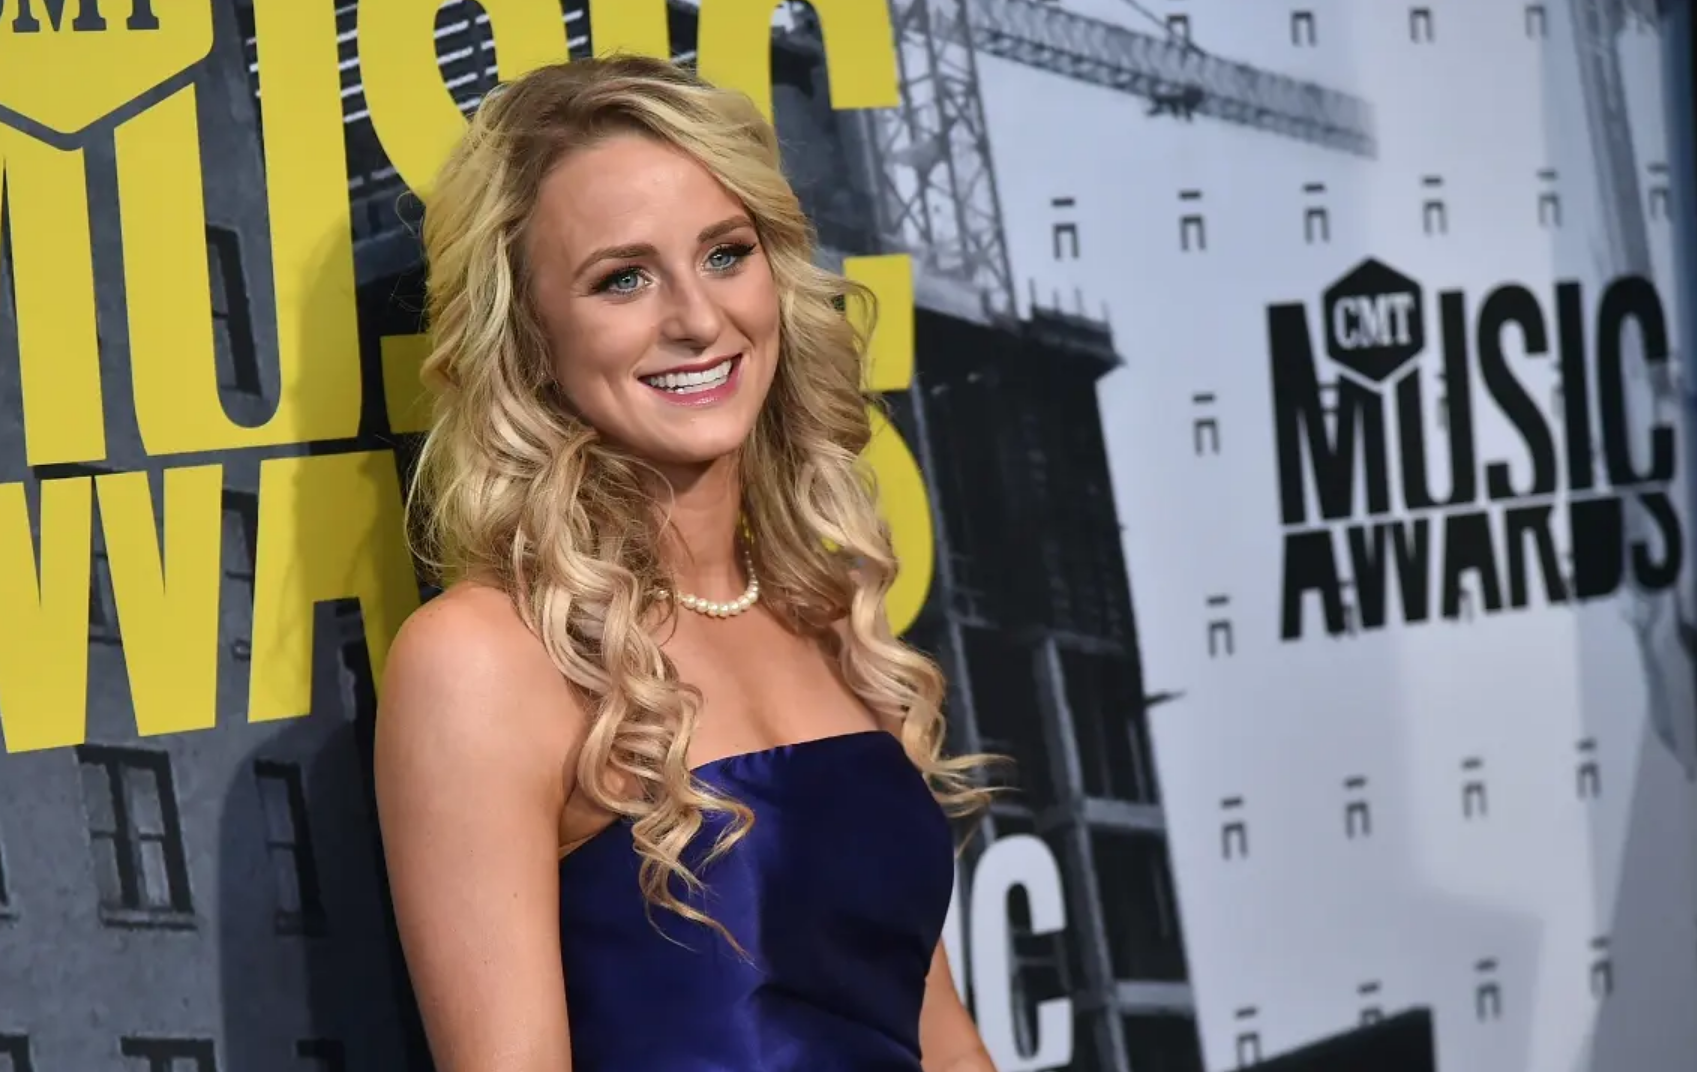 Leah Messer attending the CMT Music Awards at the Music City Center in Nashville.